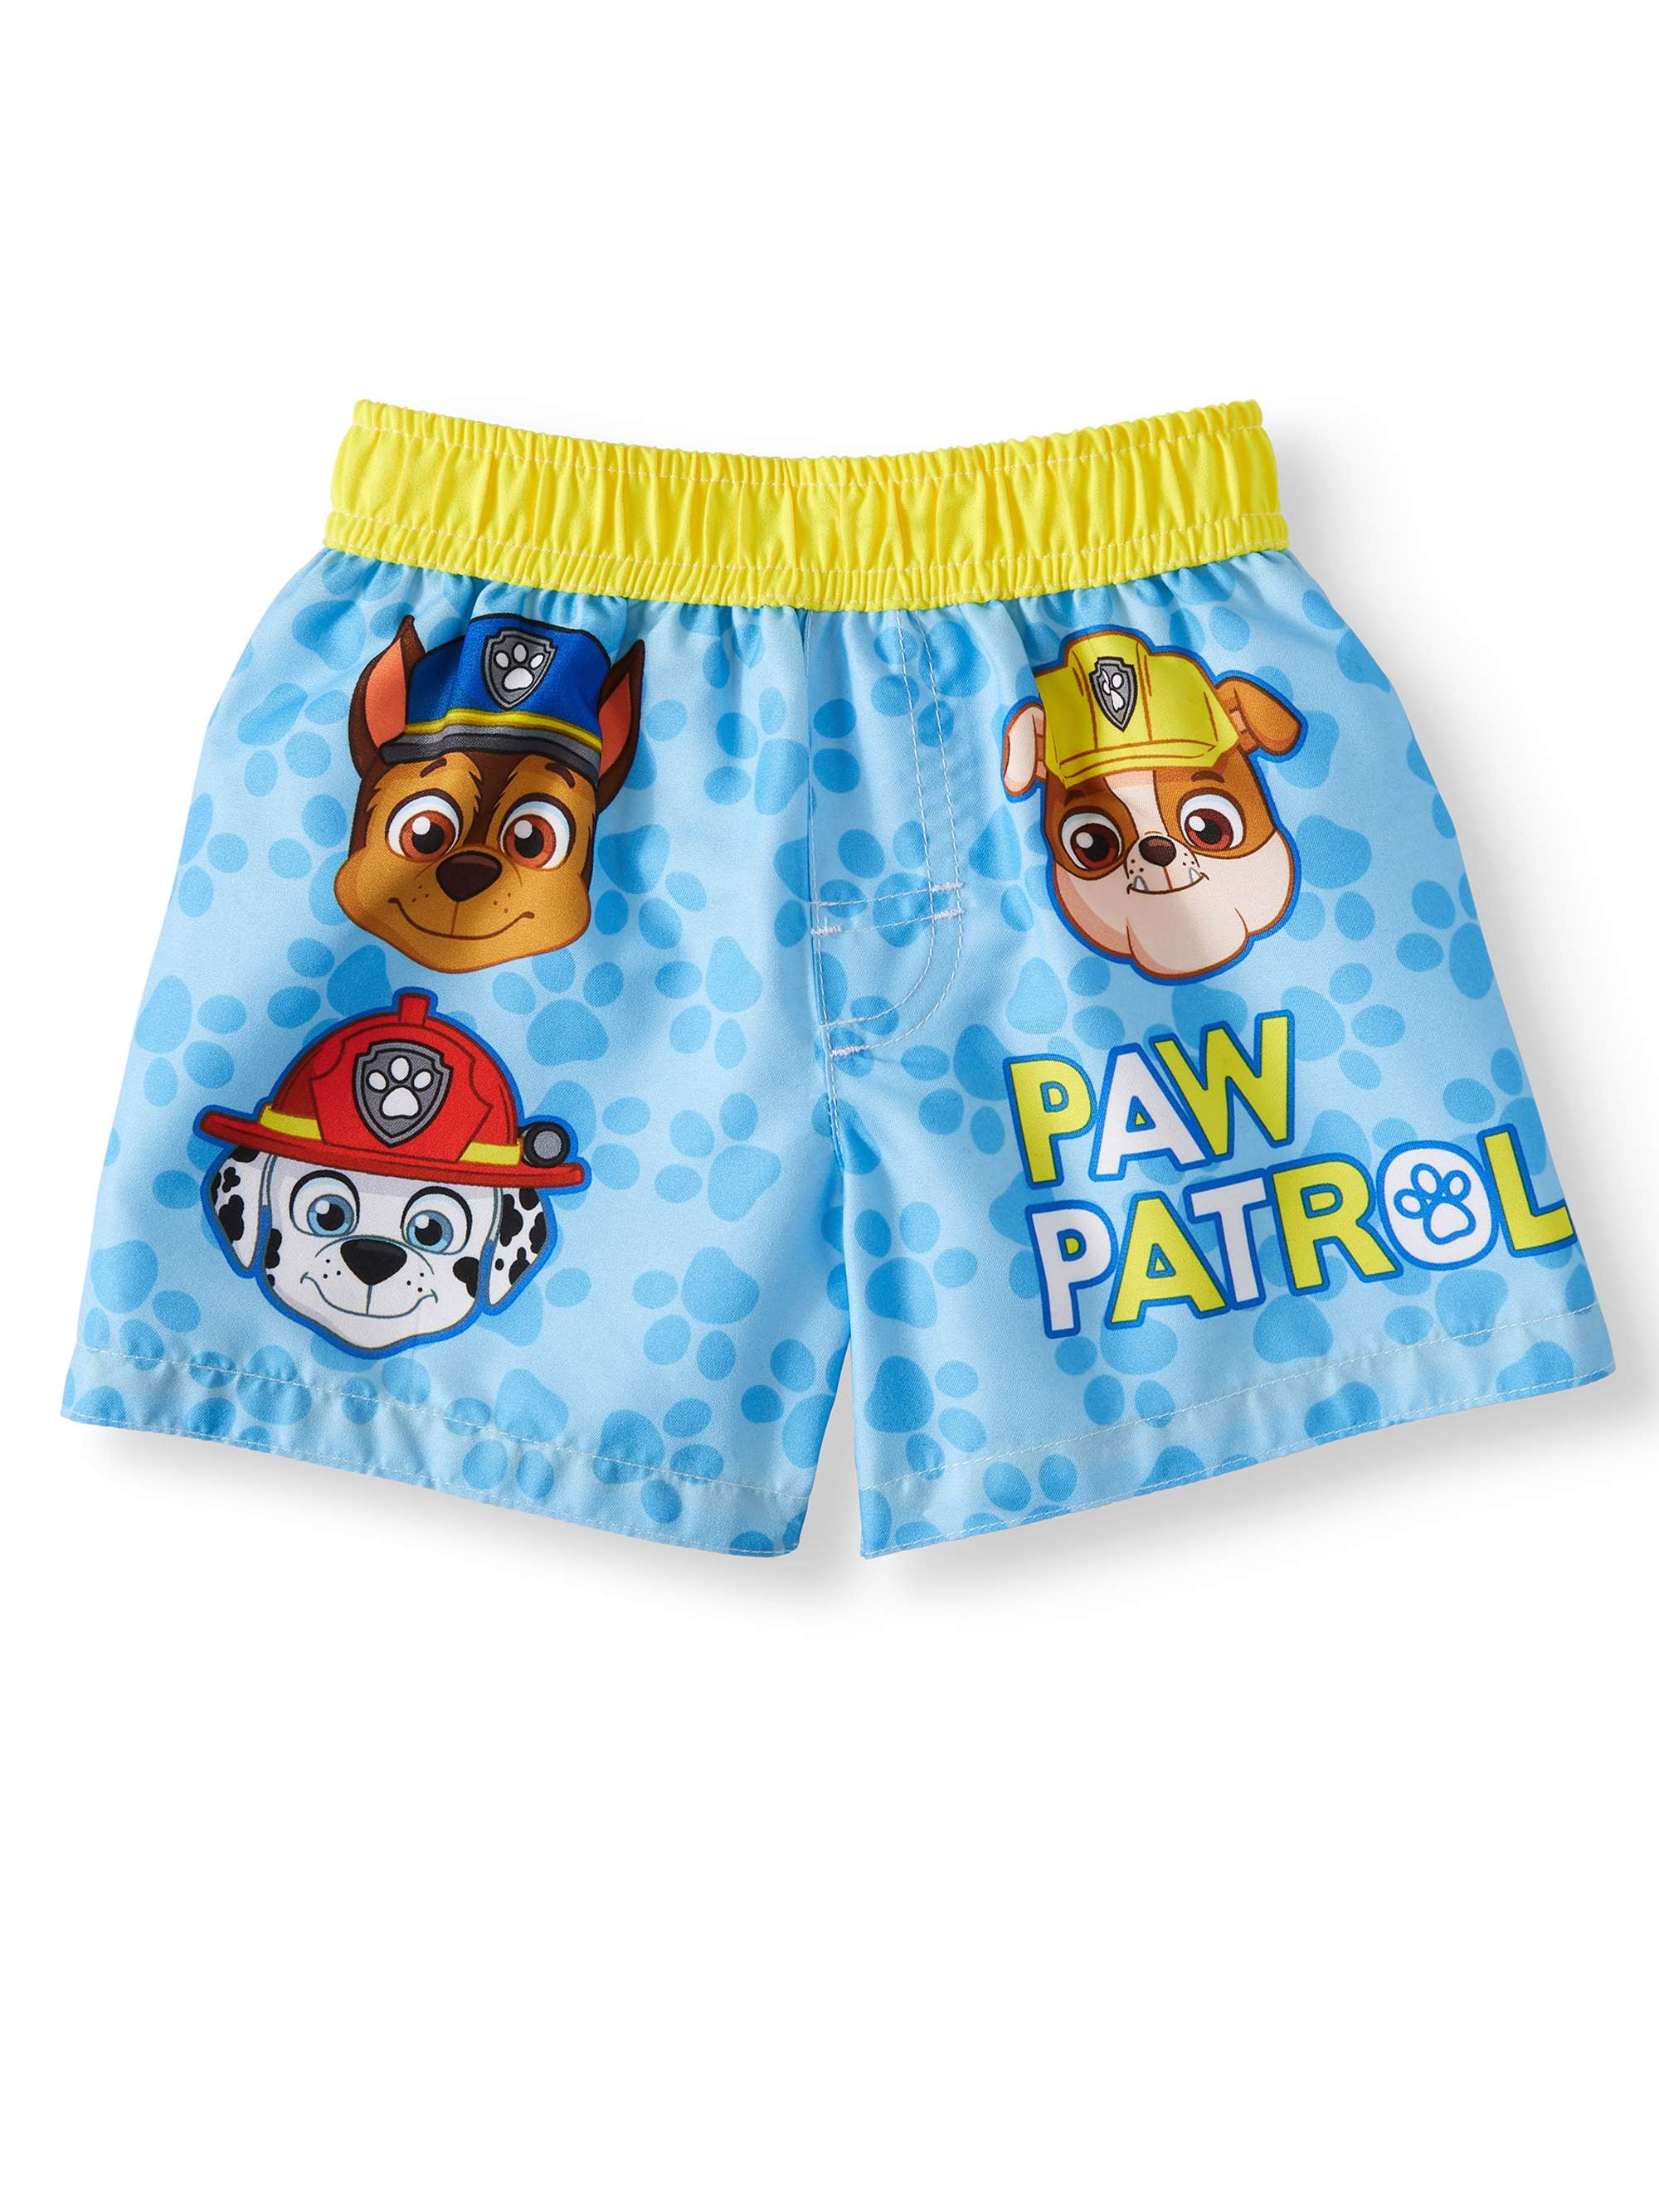 Paw Patrol Swim Shorts Team Paw Trunks for Babies and Toddlers